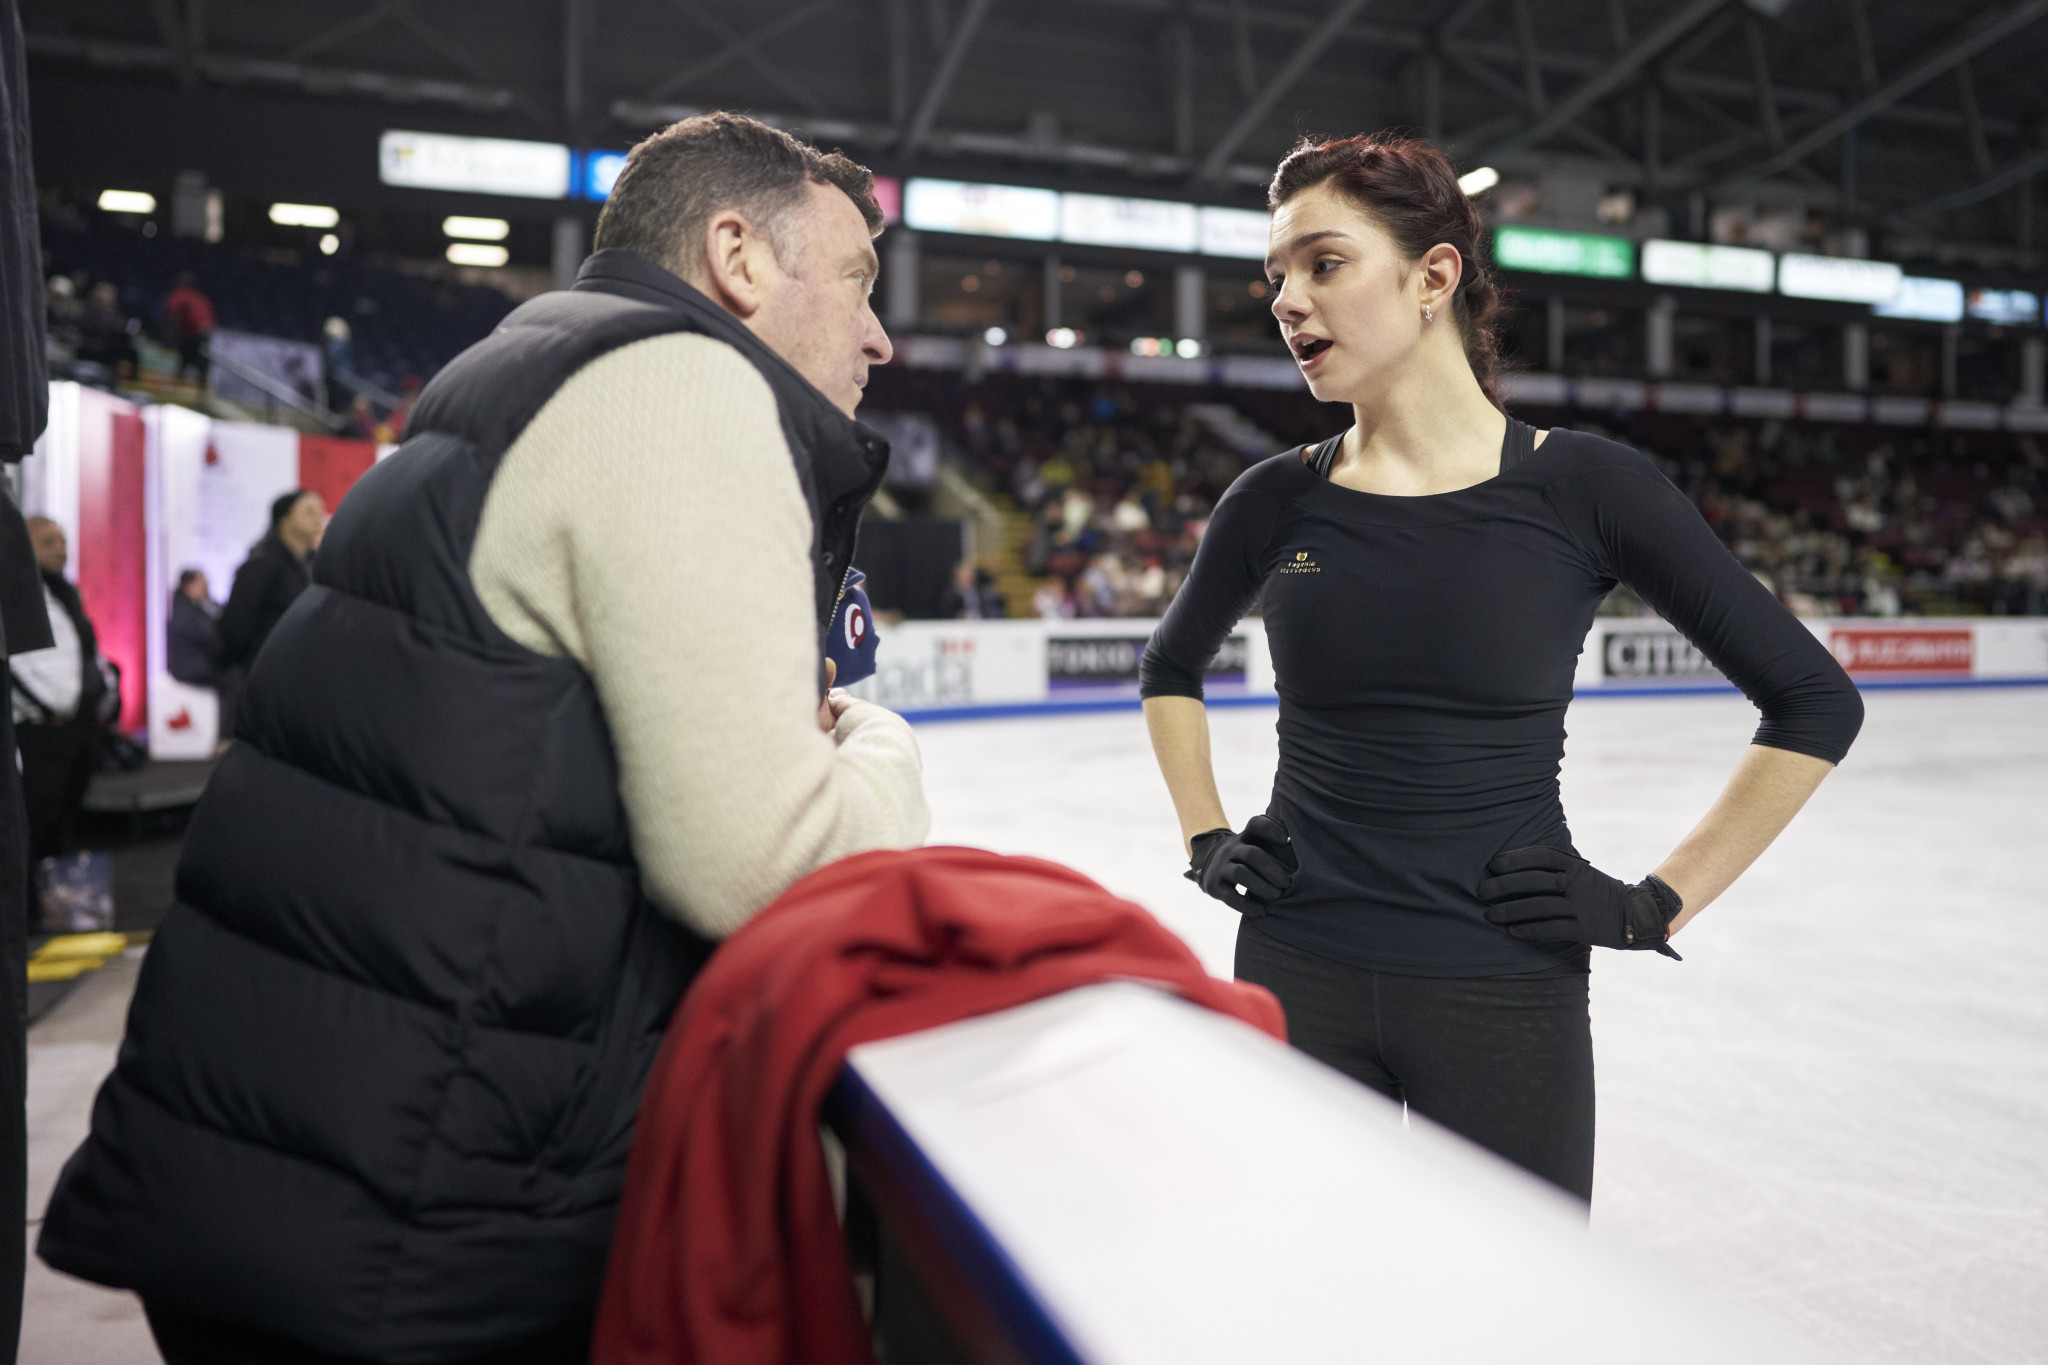 Evgenia Medvedeva had been coached by Brian Orser ©Getty Images